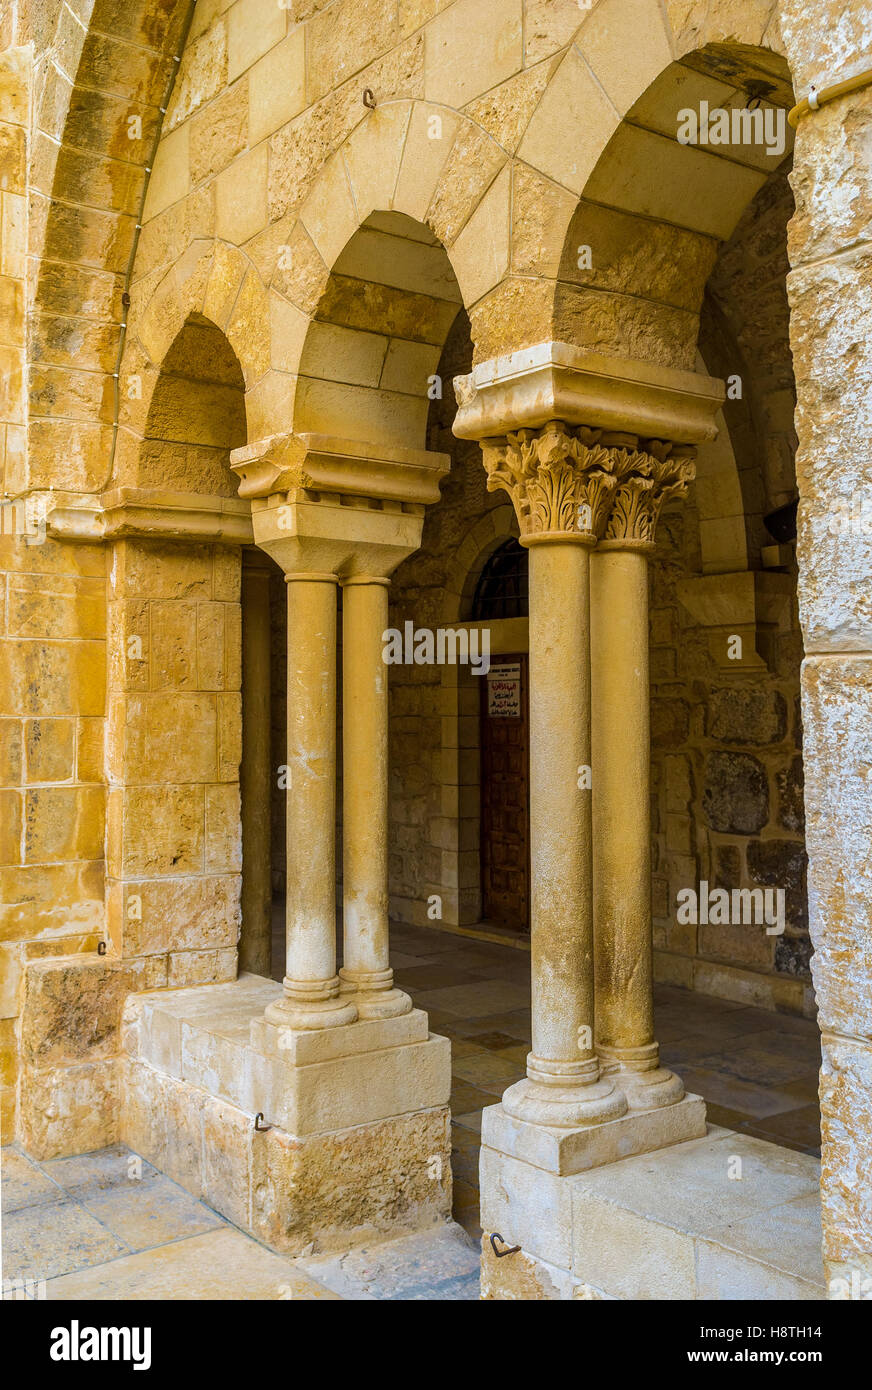 The stone columns and arches of the courtyard of the Church of the Nativity Stock Photo